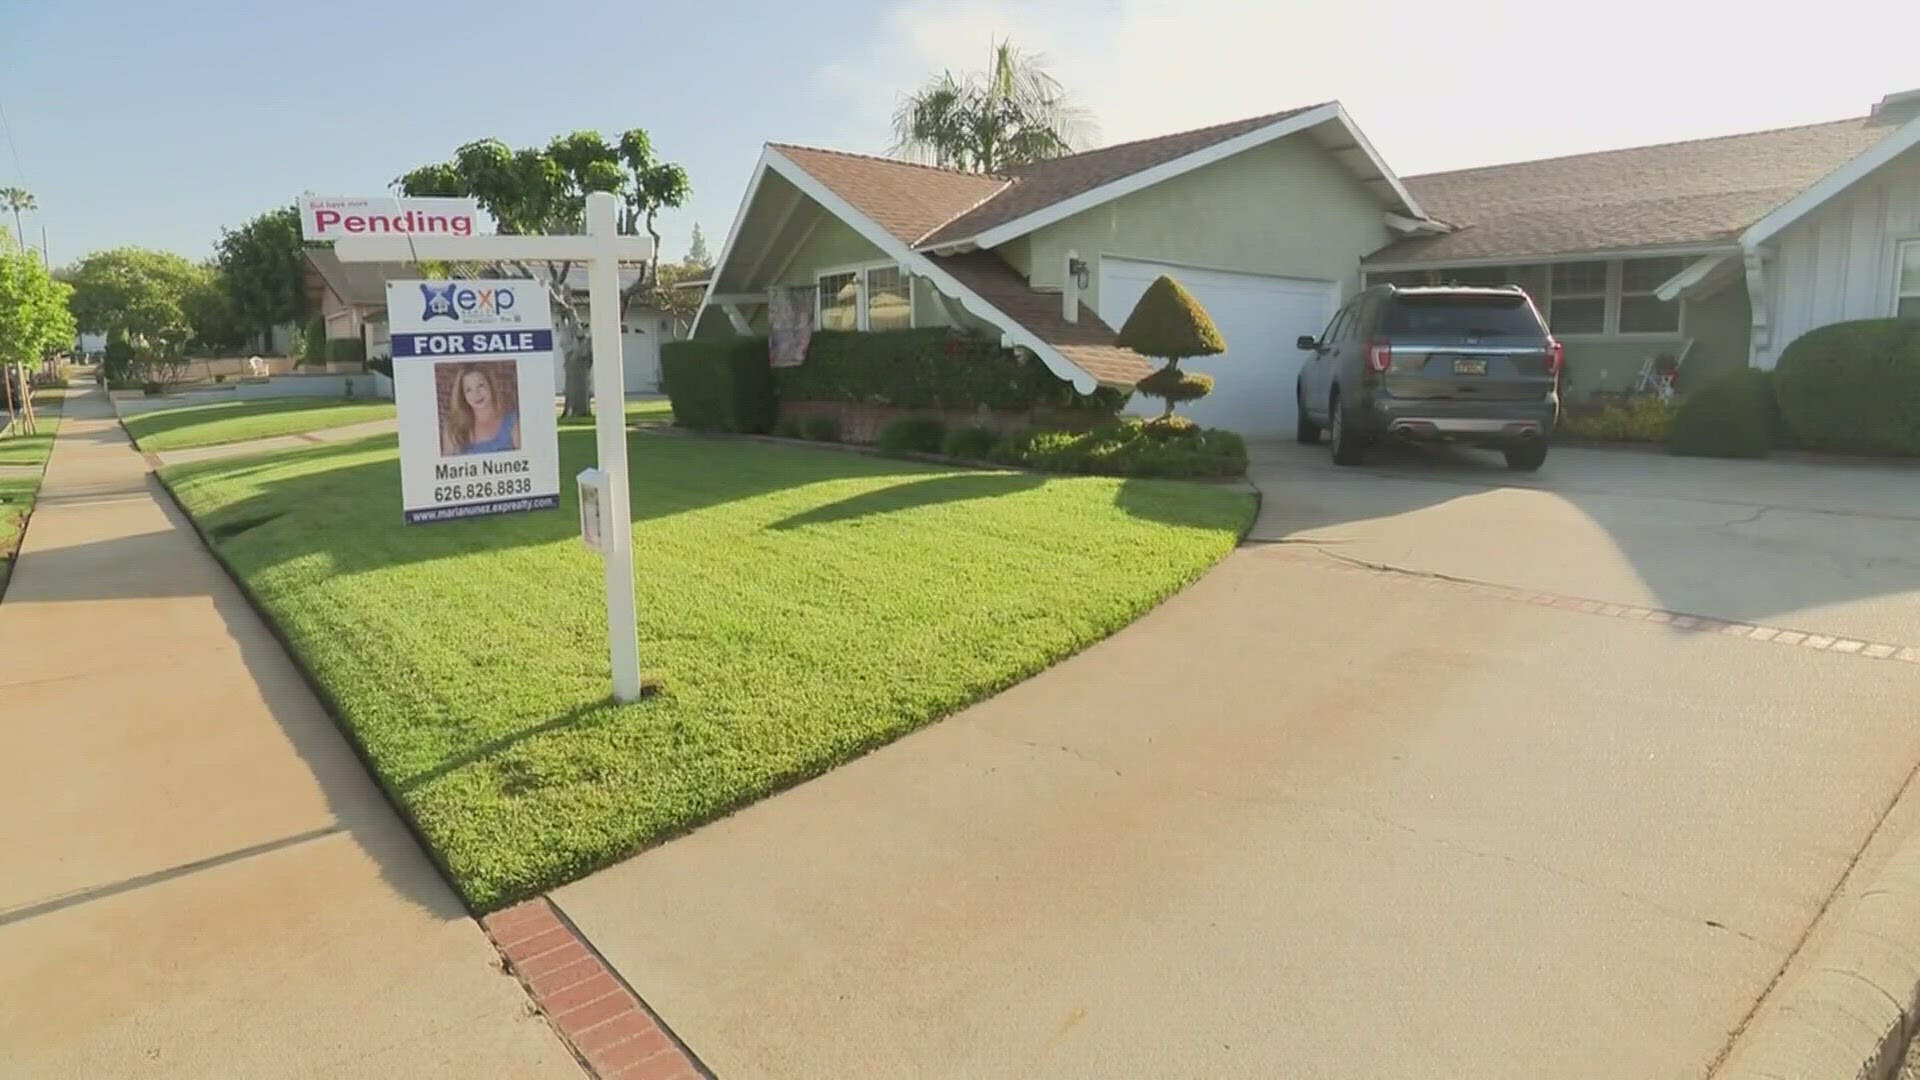 The median home price in Phoenix is around $520K.